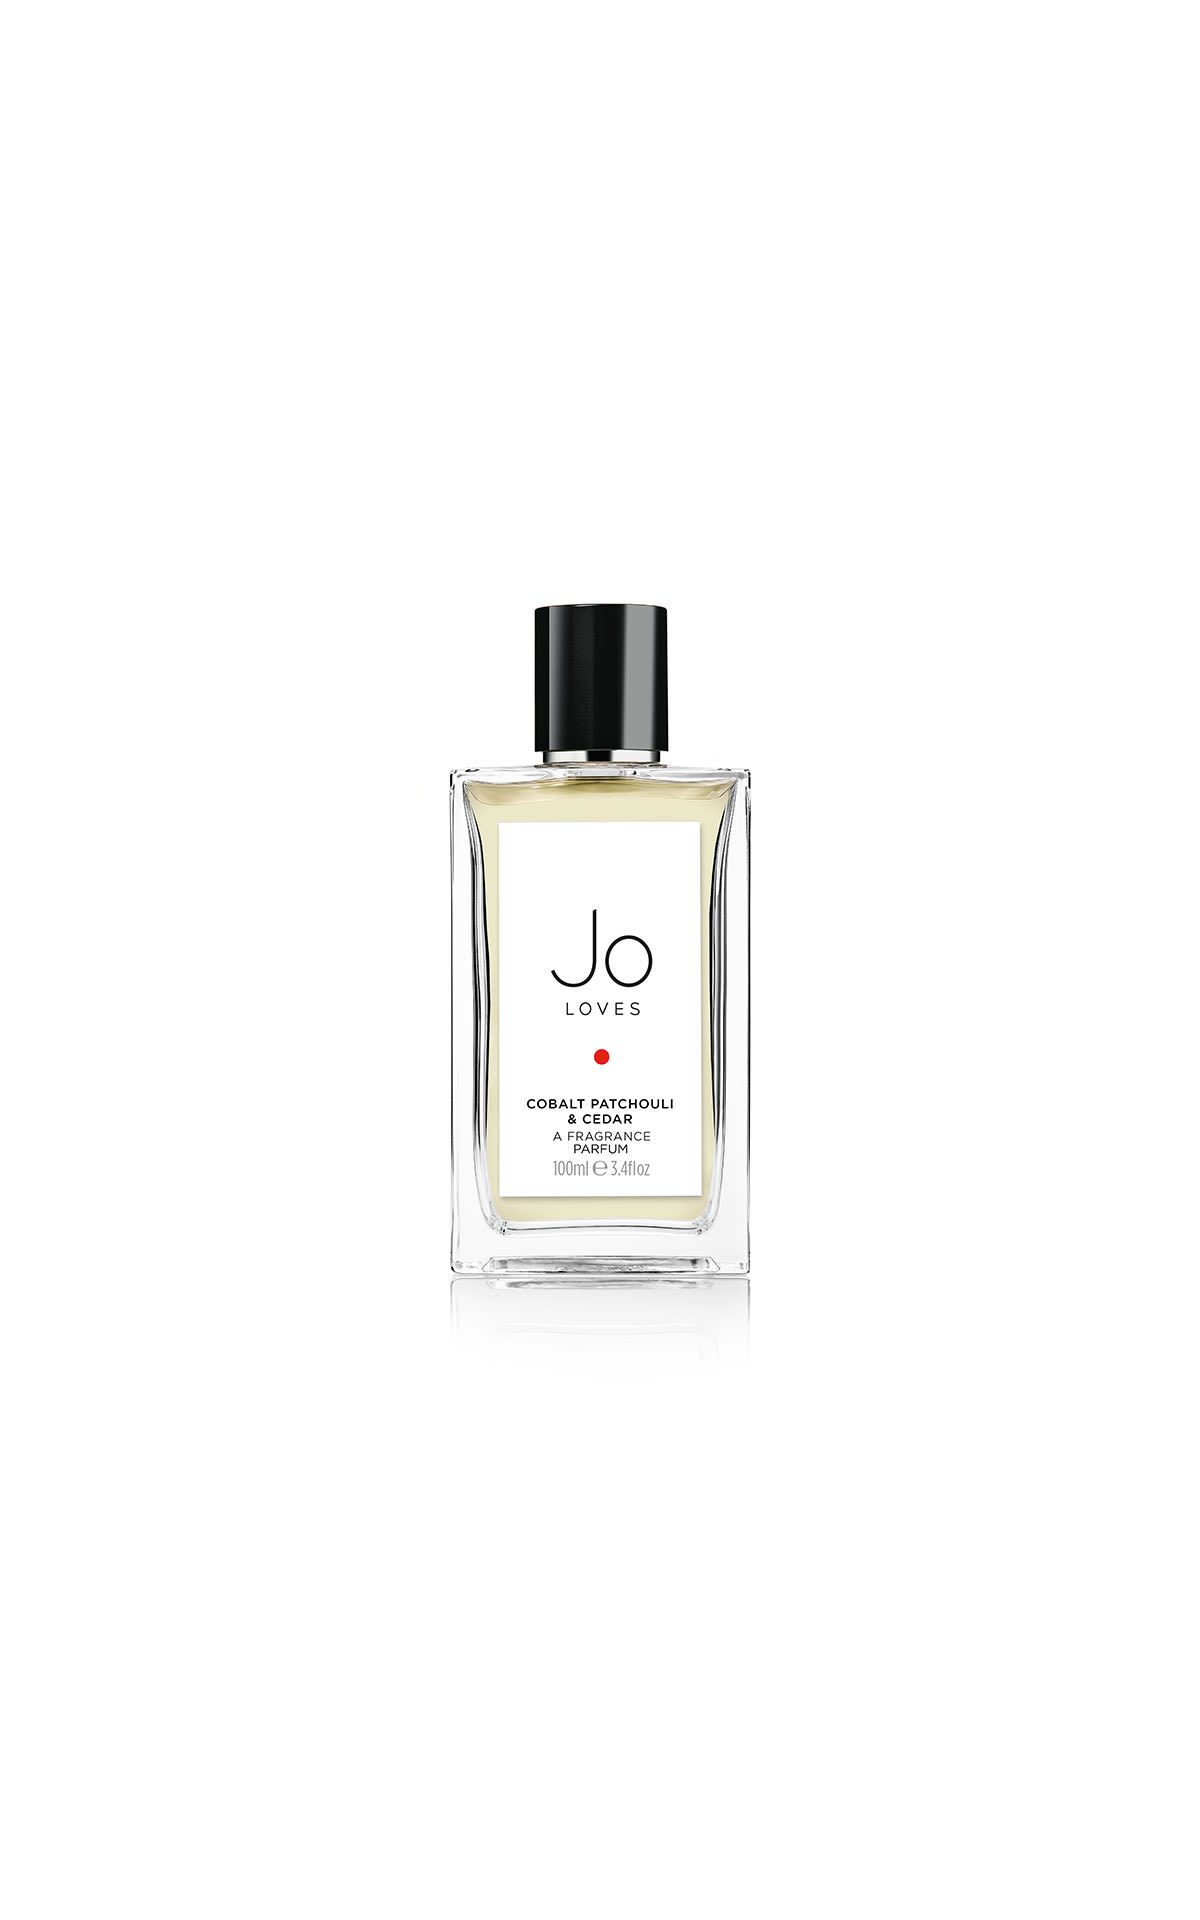 Jo Loves Limited edition cobalt pathouli and cedar fragrance from Bicester Village